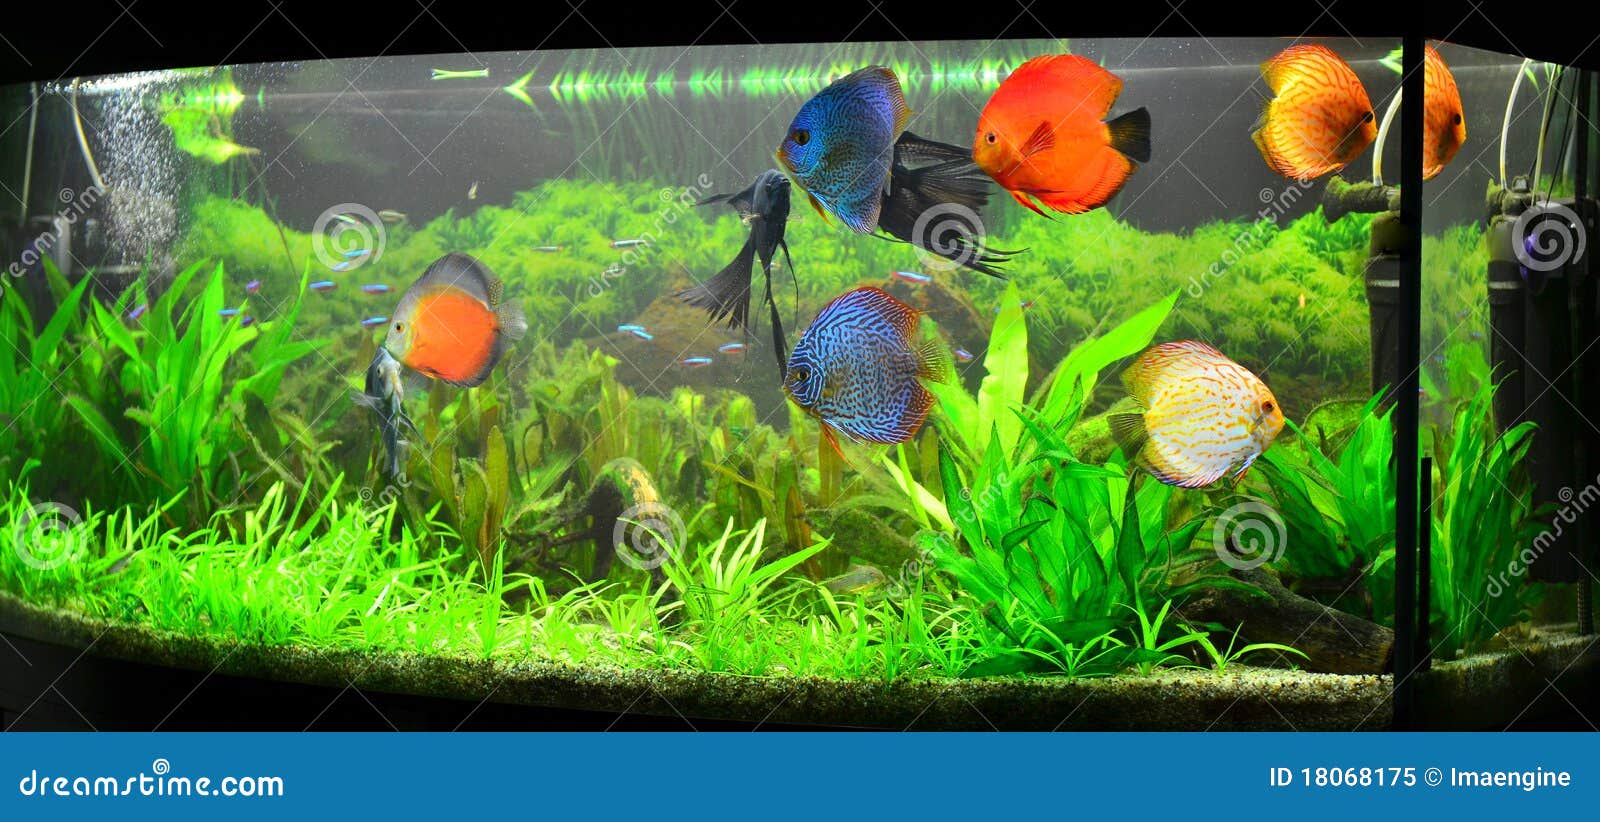 Home Aquarium With Discus Fish And Plants Royalty Free Stock Photo ...